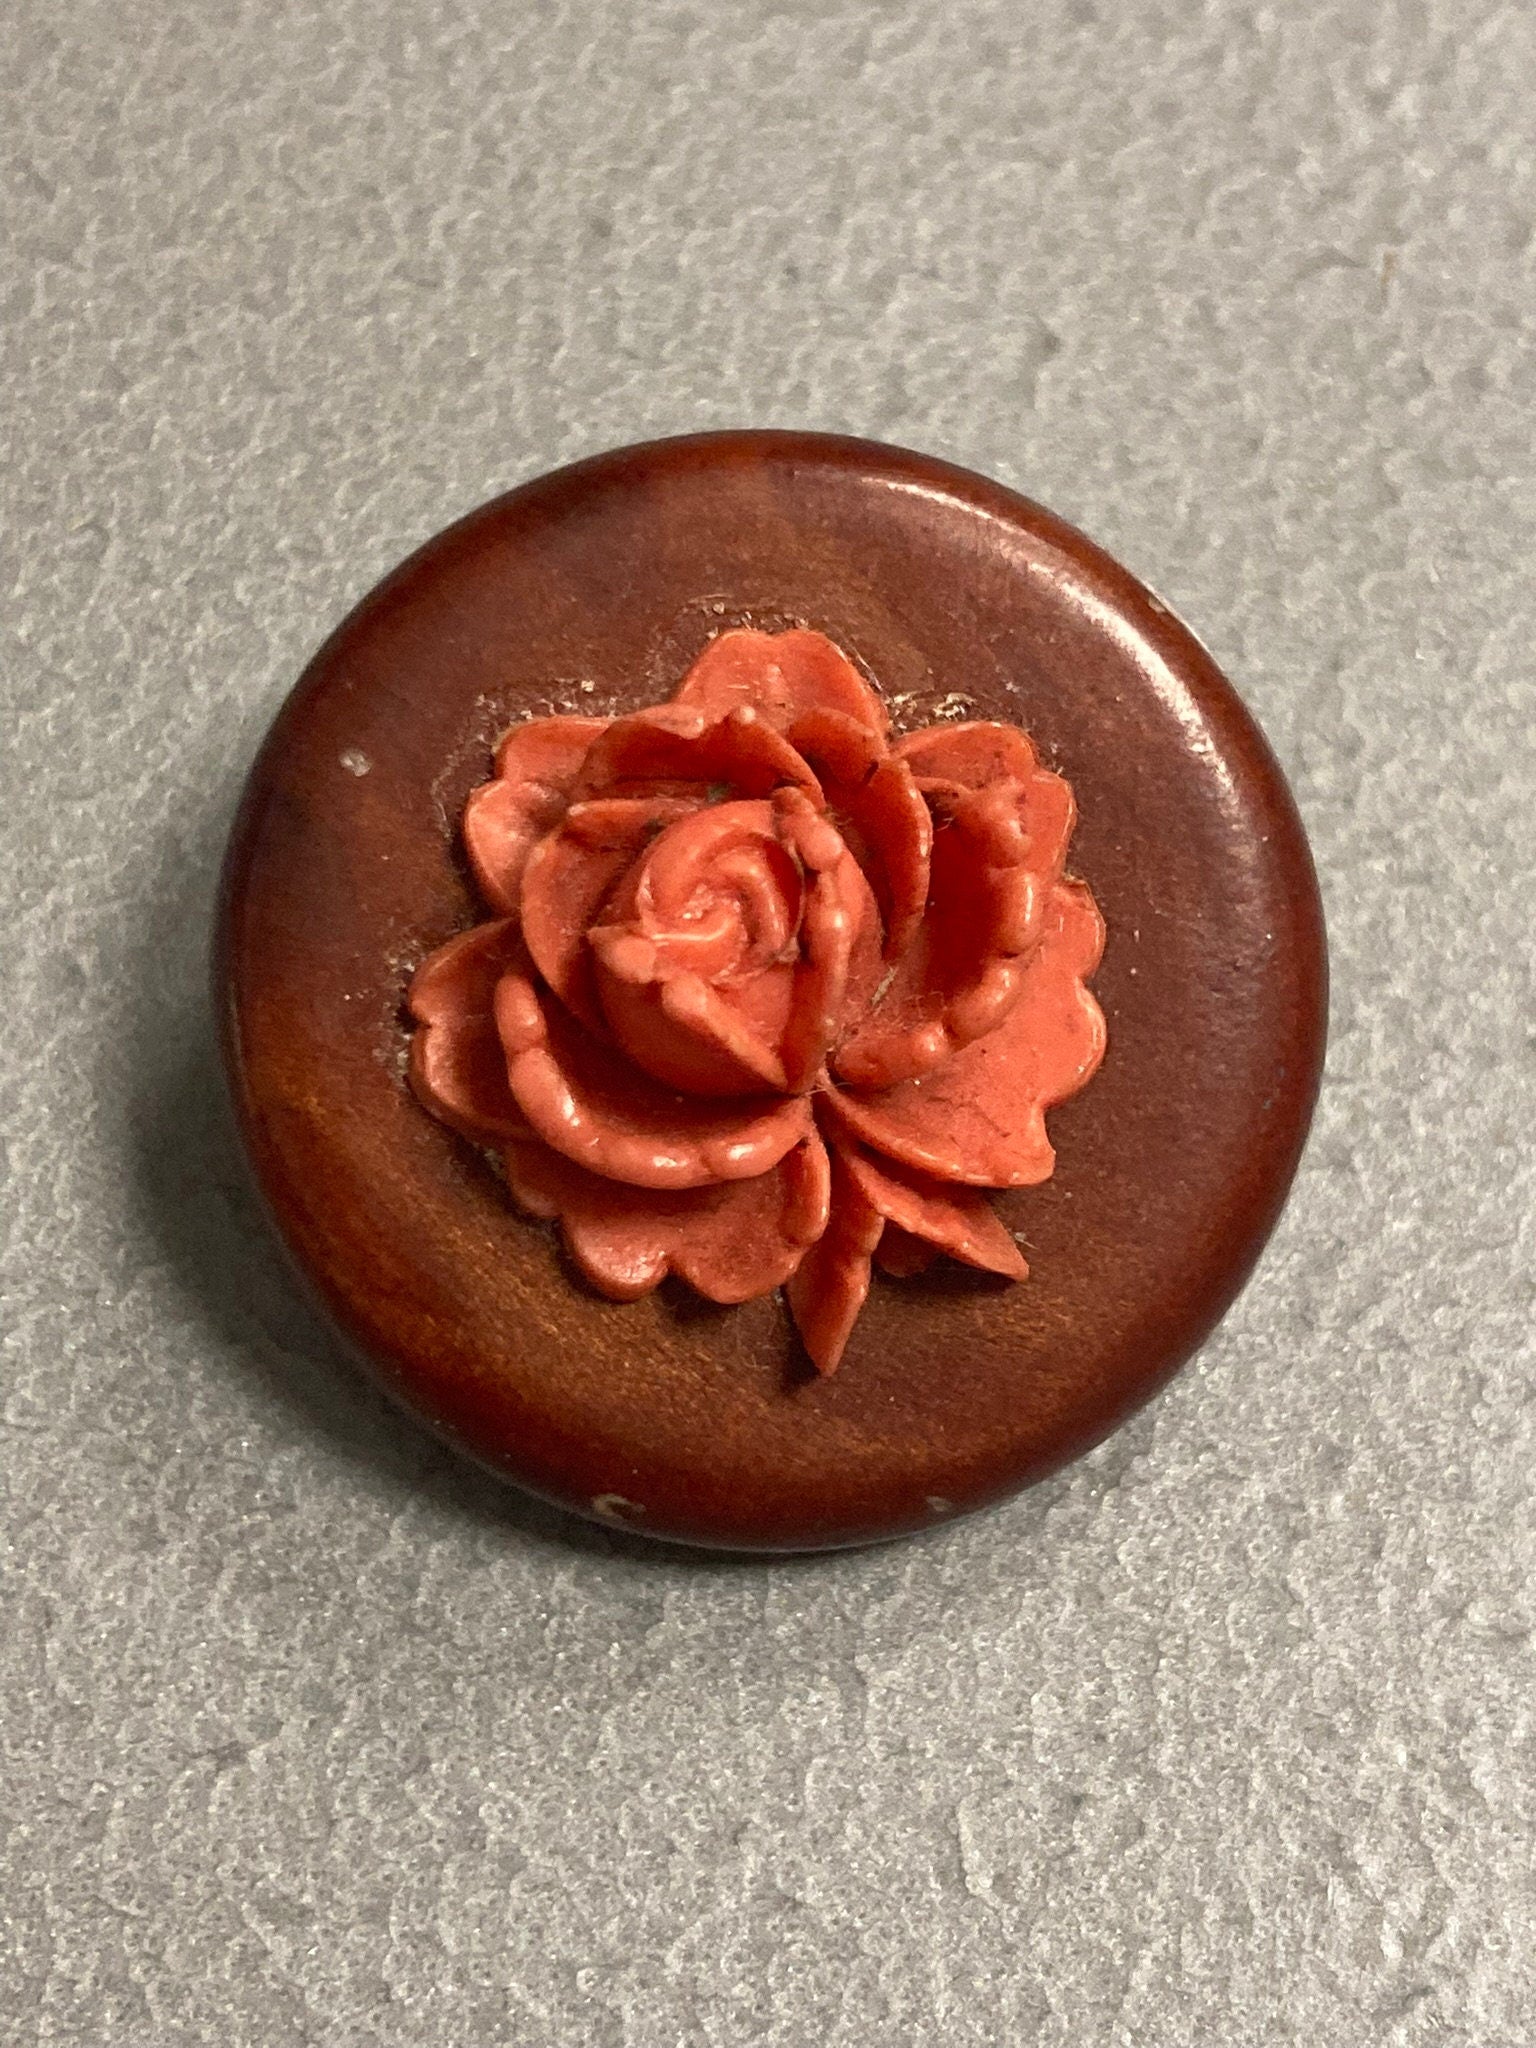 Reserved for holly 03.2 Early Plastic Celluloid Art Deco brown orange resin floral rose brooch